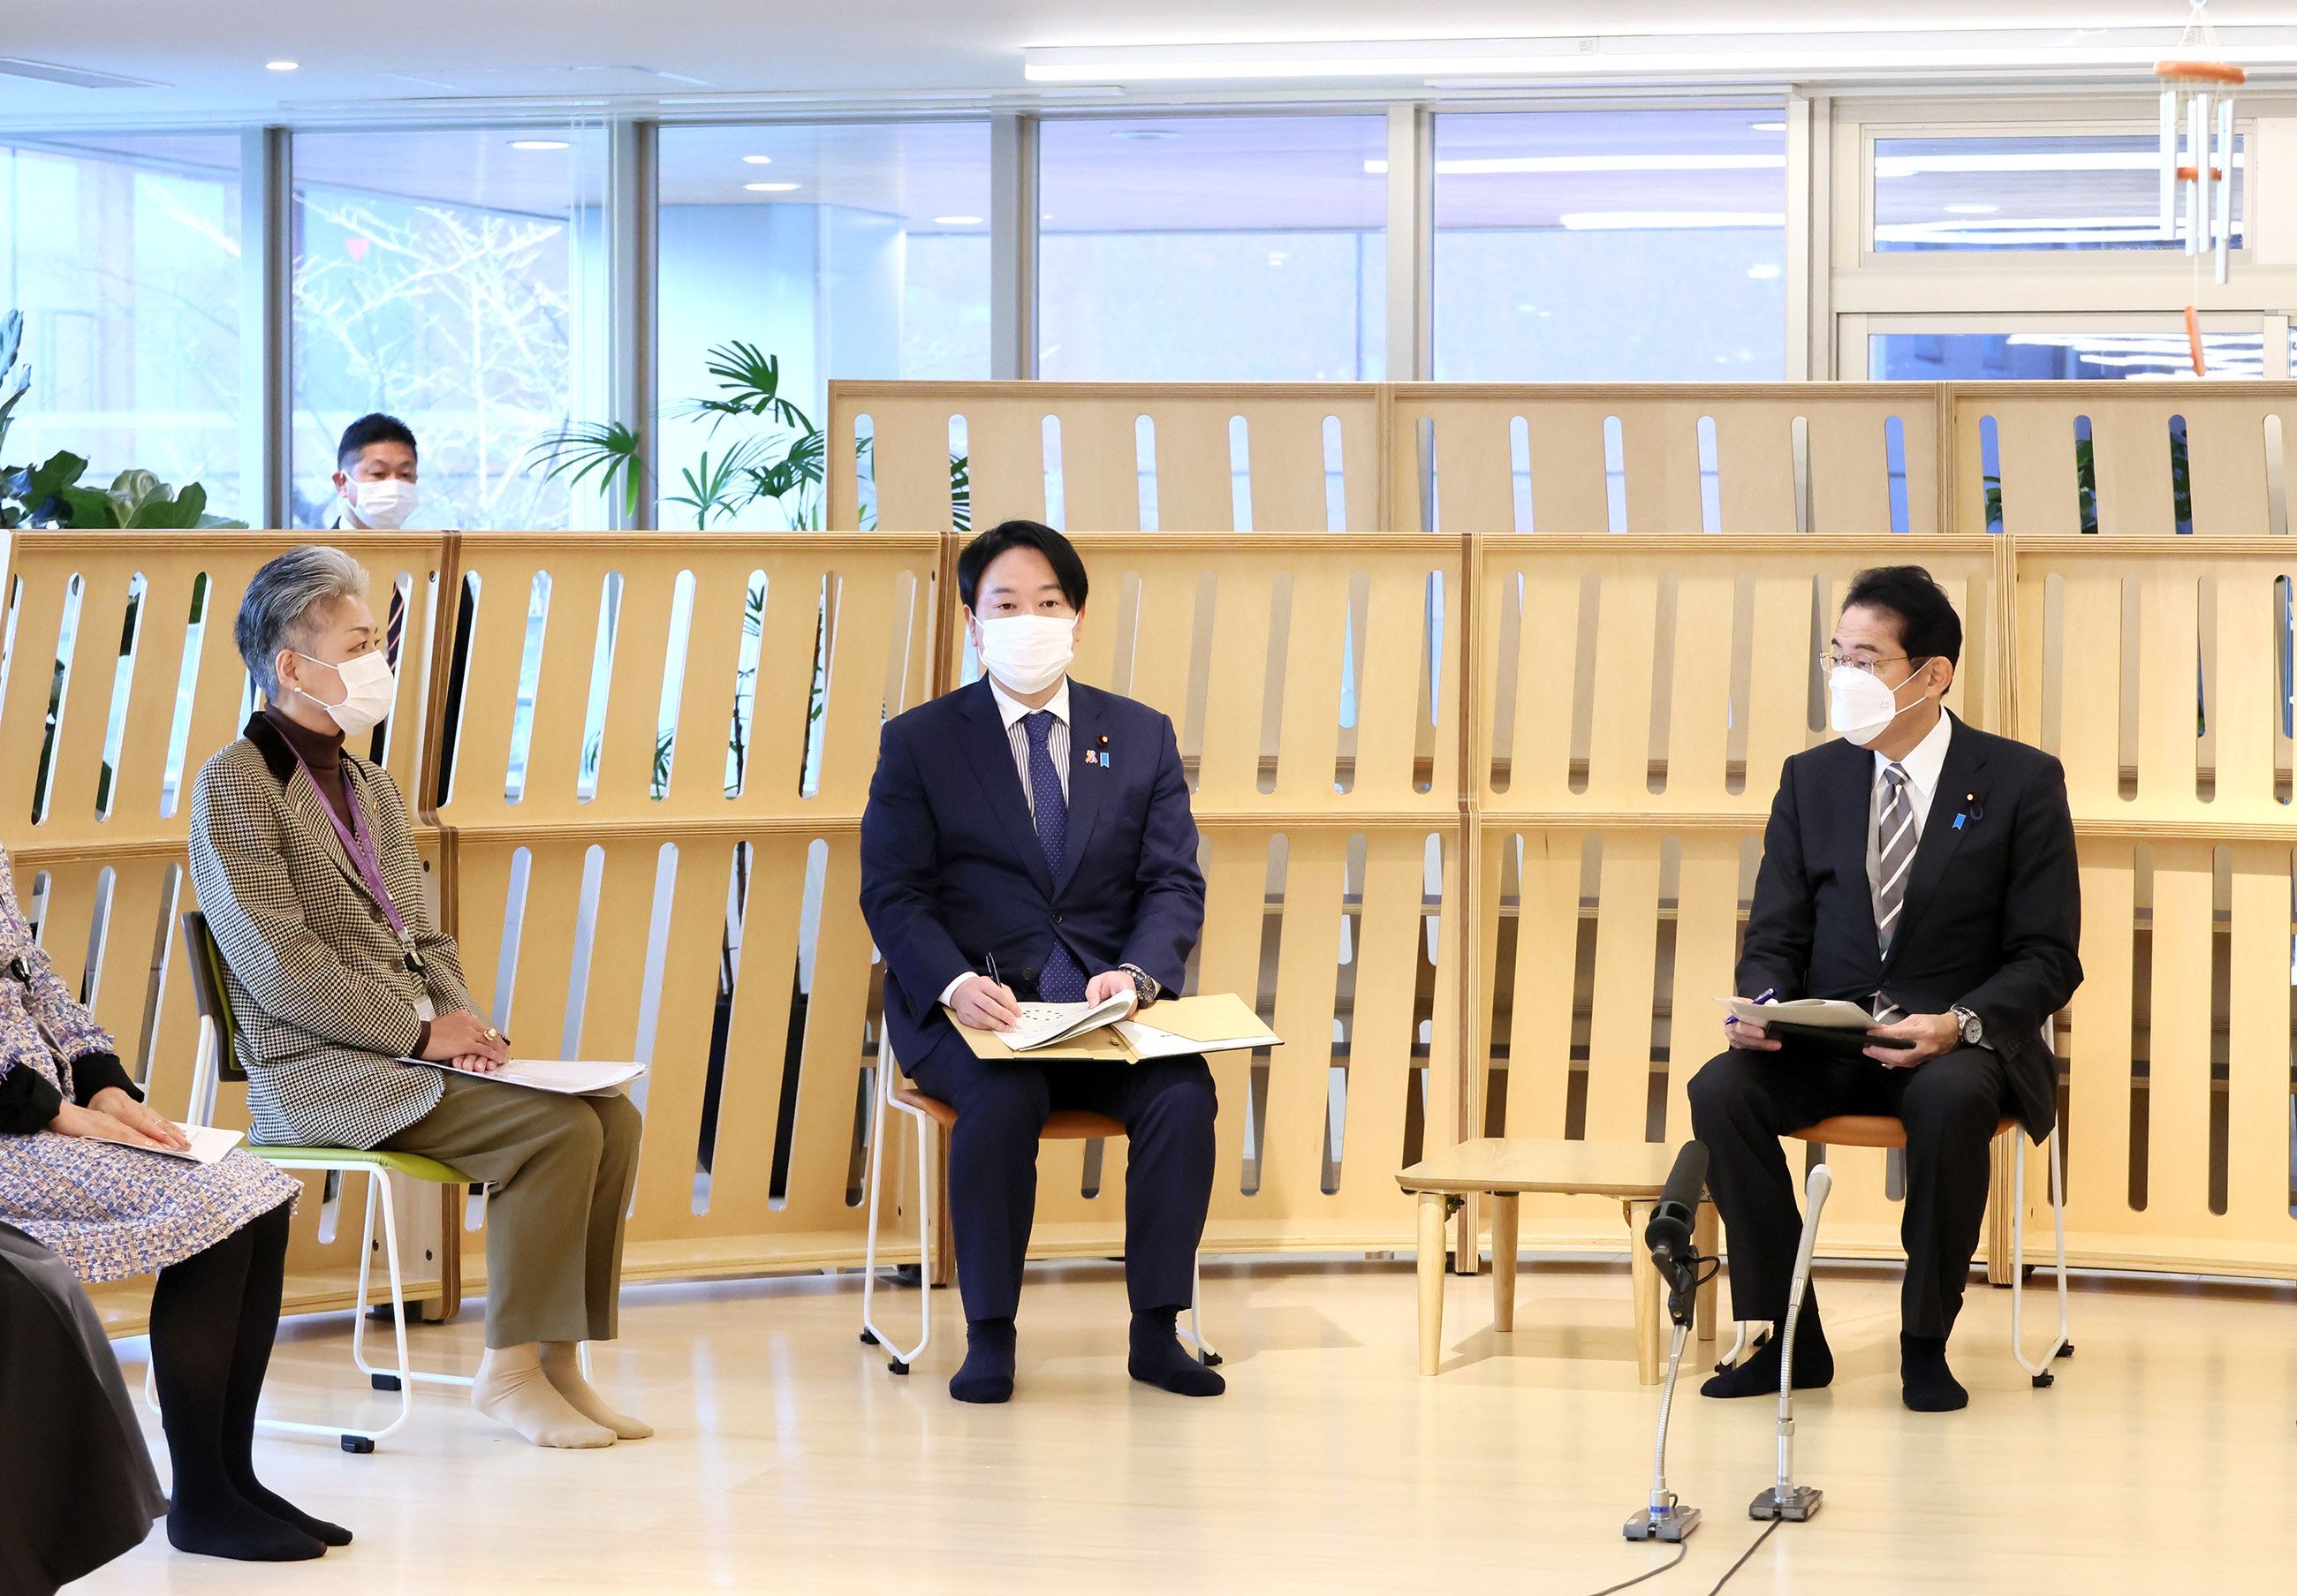 Prime Minister Kishida listening to a small group of people (1)